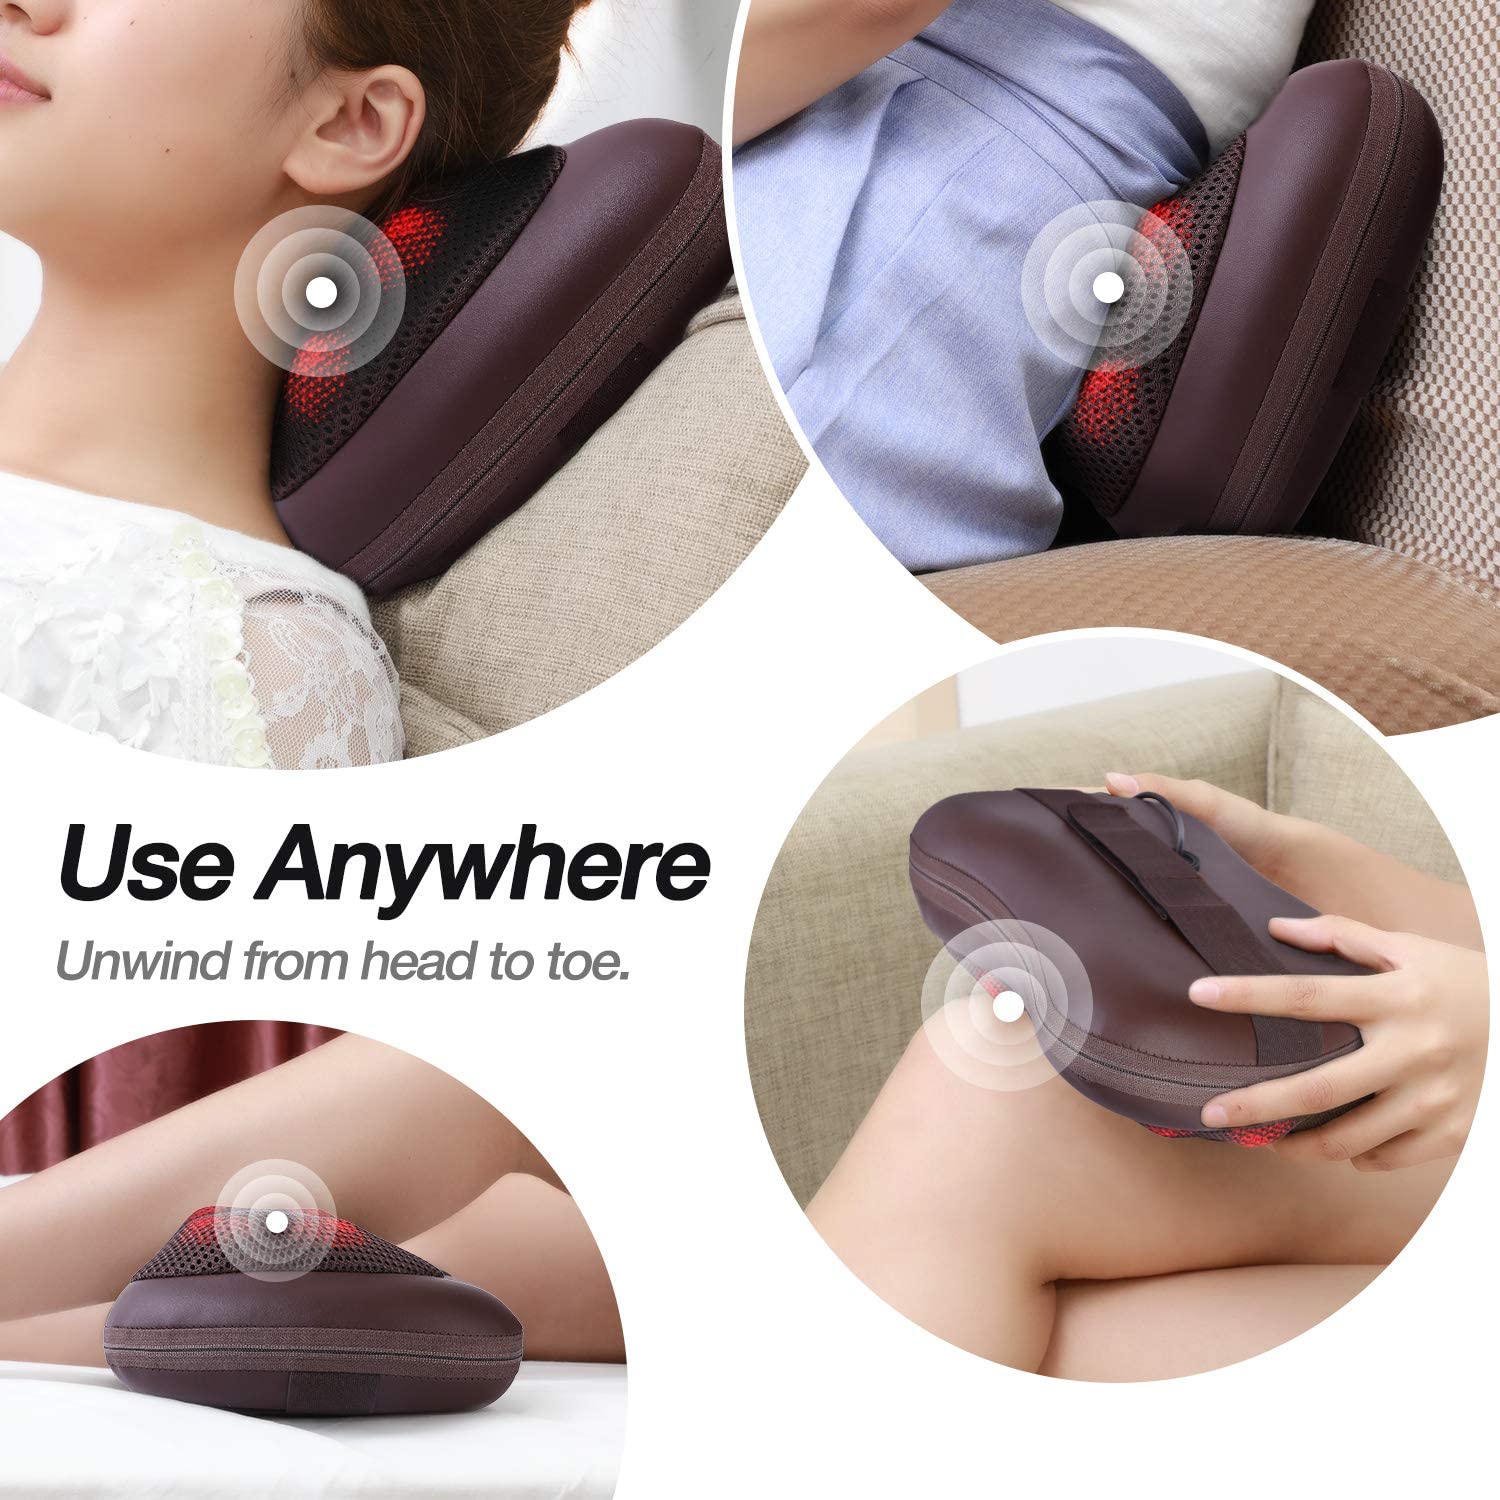 5-in-1 Pillow Shiatsu Massager For Home And Car - Dealsclub™